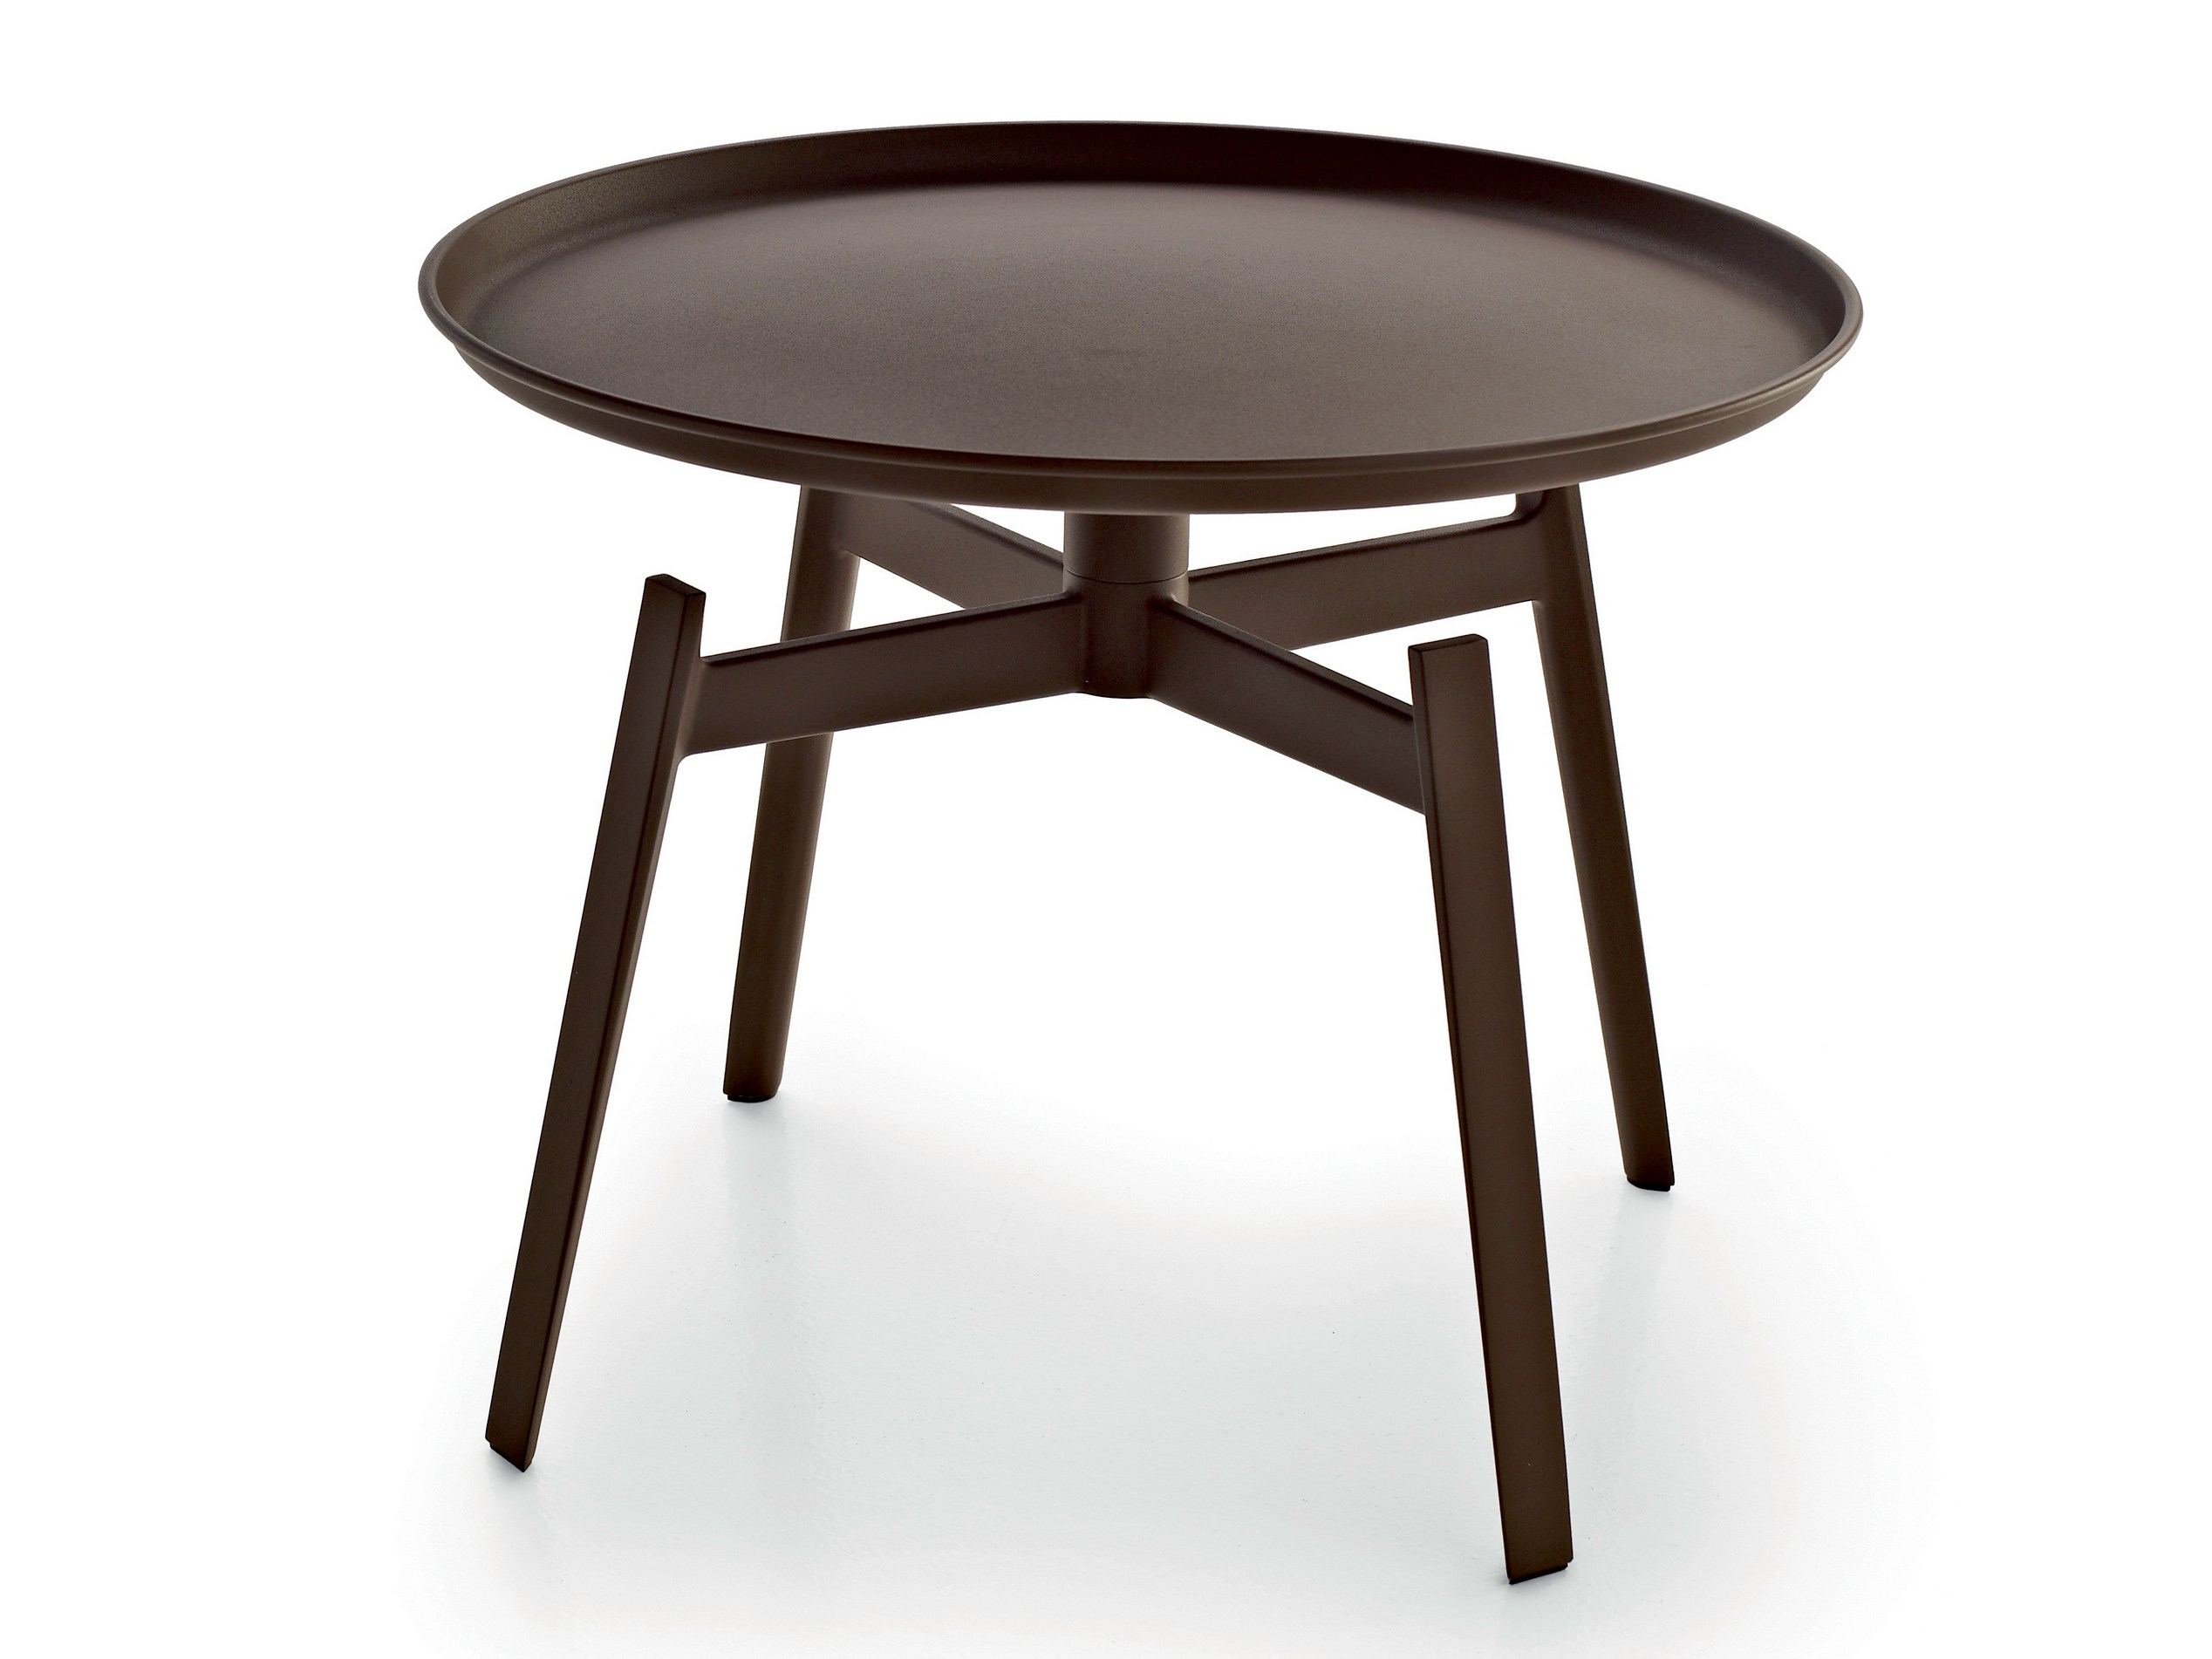 coffee tables table with umbrella hole small garden soft and chair inspiration outdoor modern ideas side round mini light end accent black wood gold stool sewing desk living room